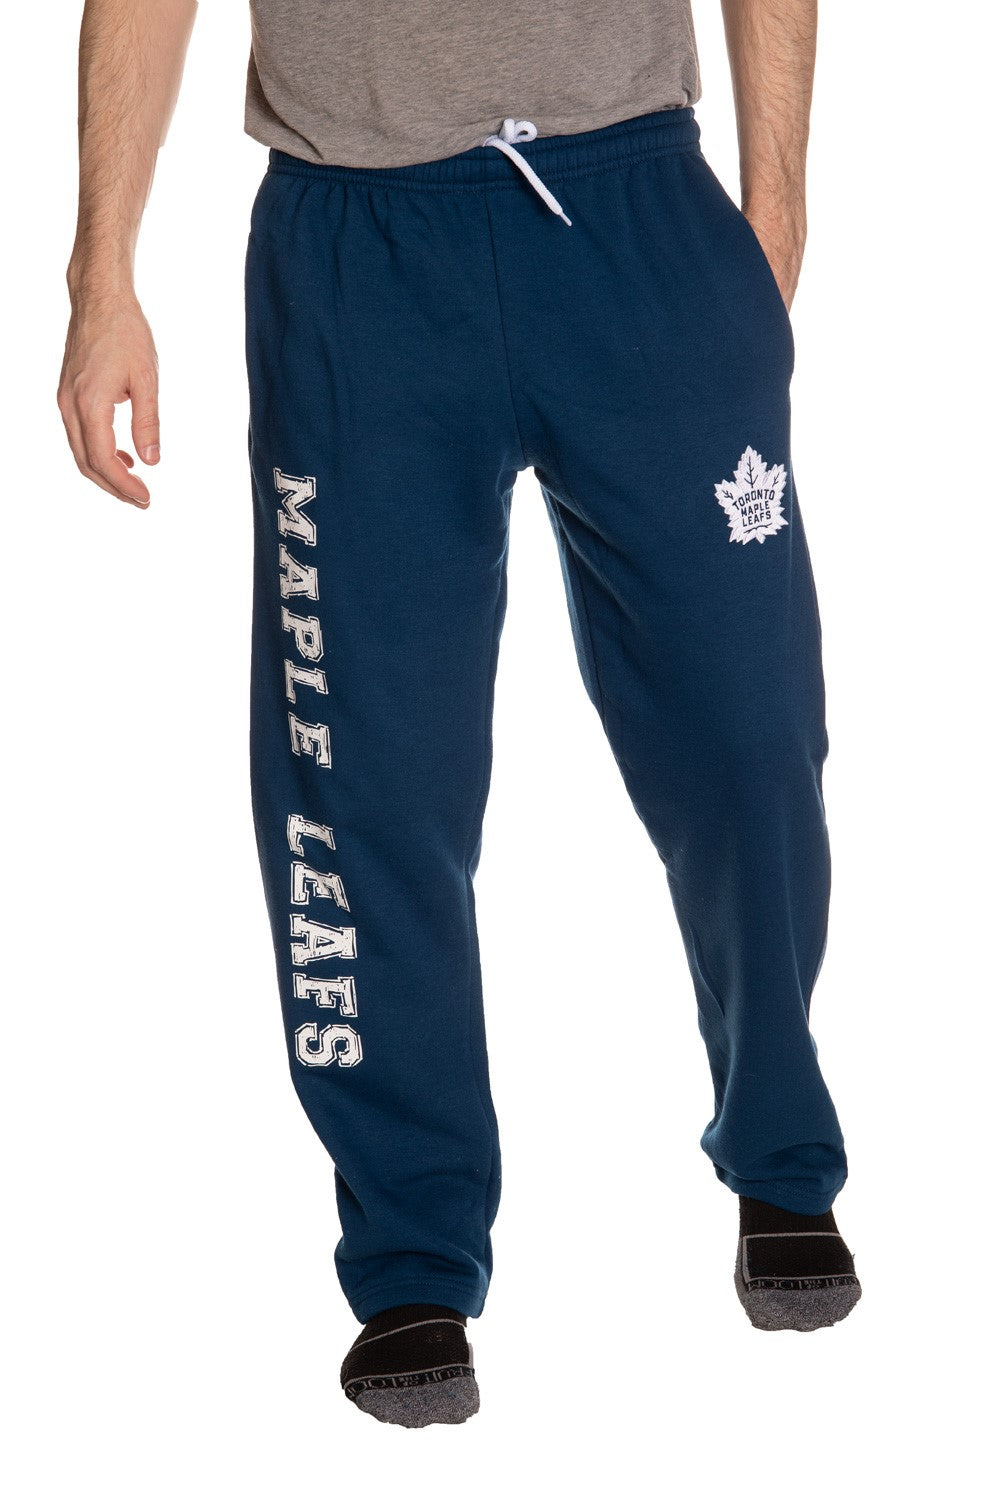 Toronto Maple Leafs Officially NHL Licensed Track Pants